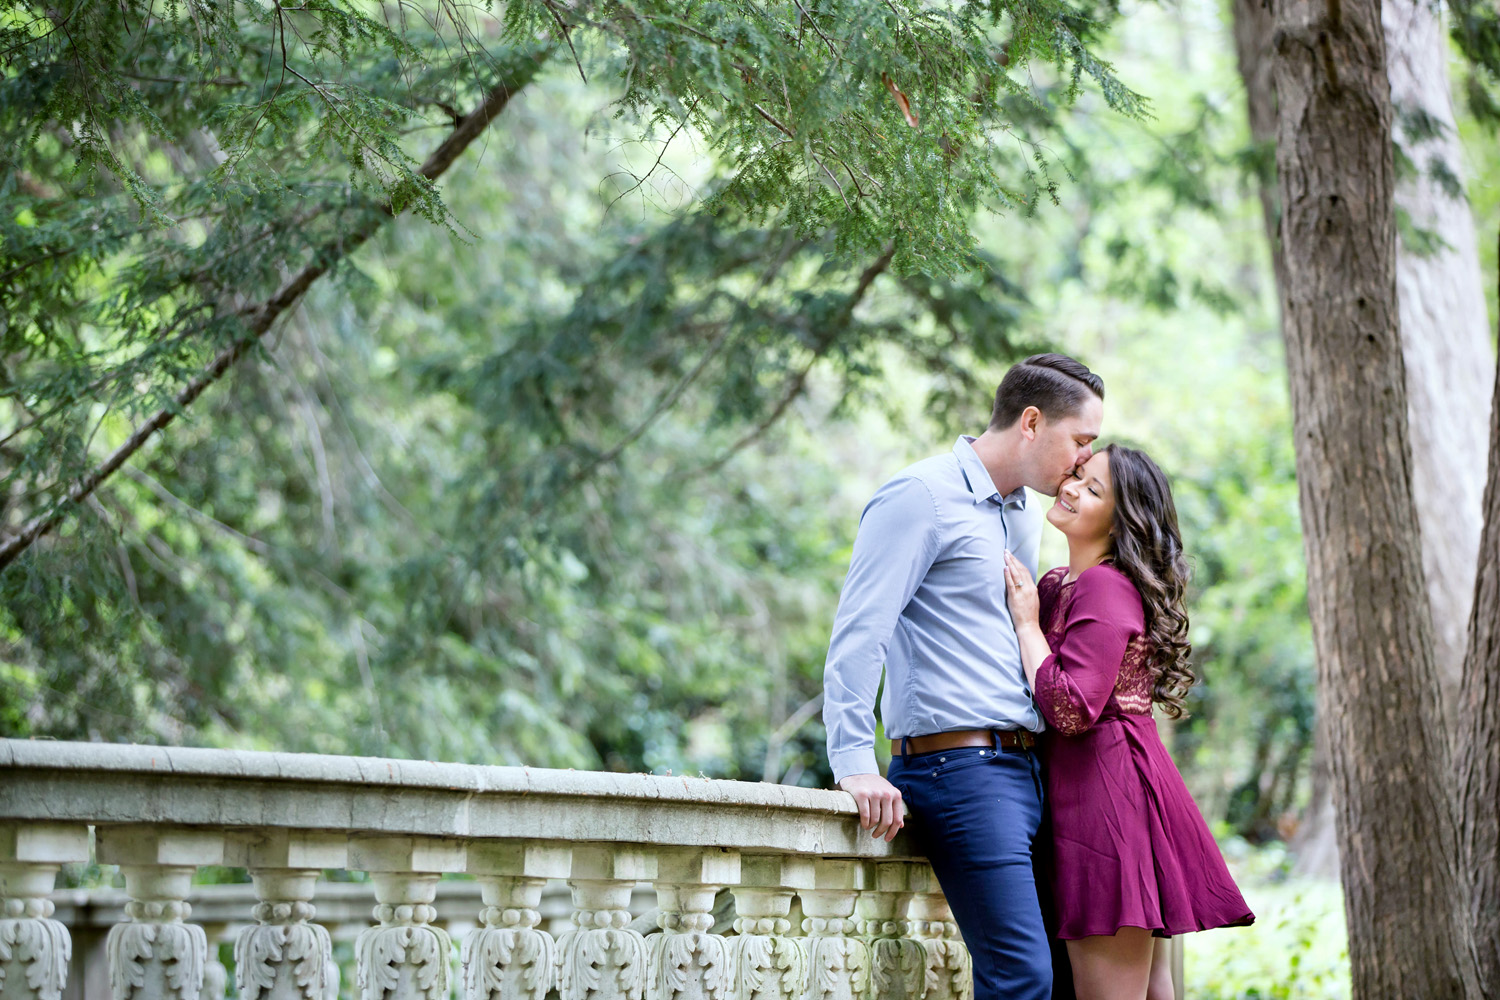 Alana + Jerry’s Super Fun + Sweet Engagement Session at the Cator Woolford Gardens, Atlanta, GA